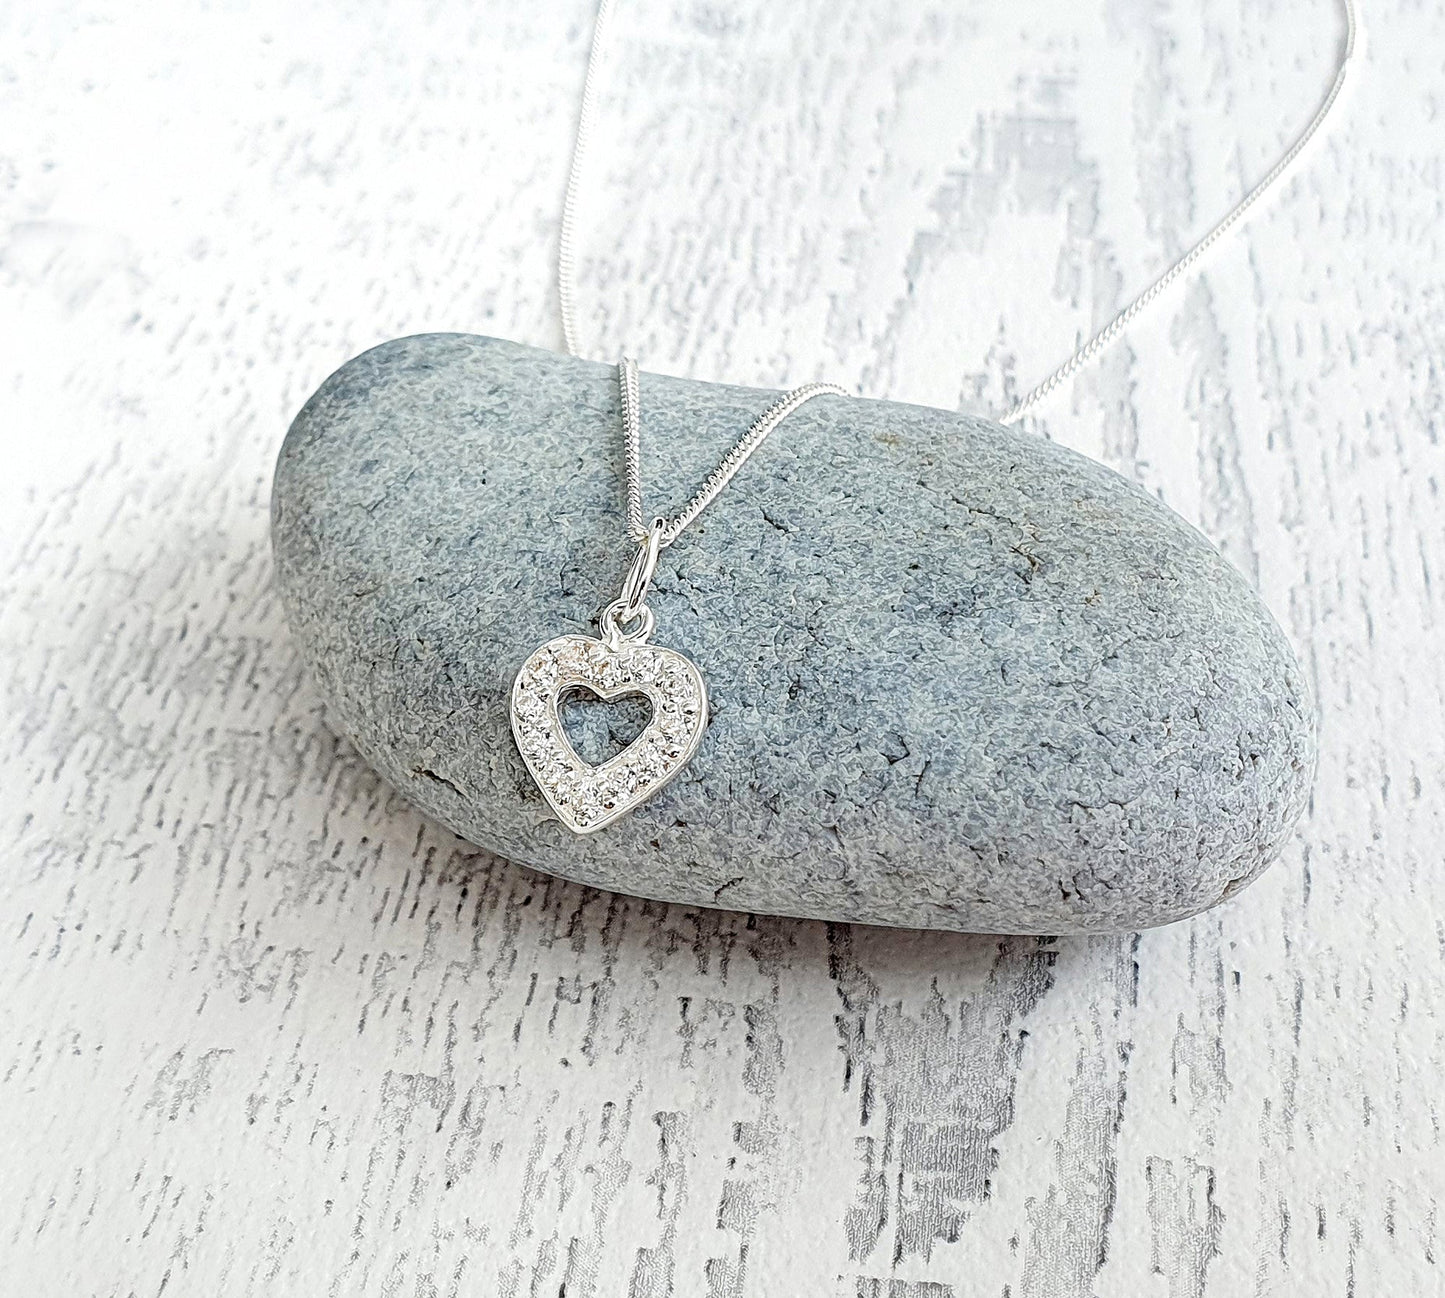 Granddaughter Heart Necklace with Cubic Zirconia in Sterling Silver 925, Personalised Gift